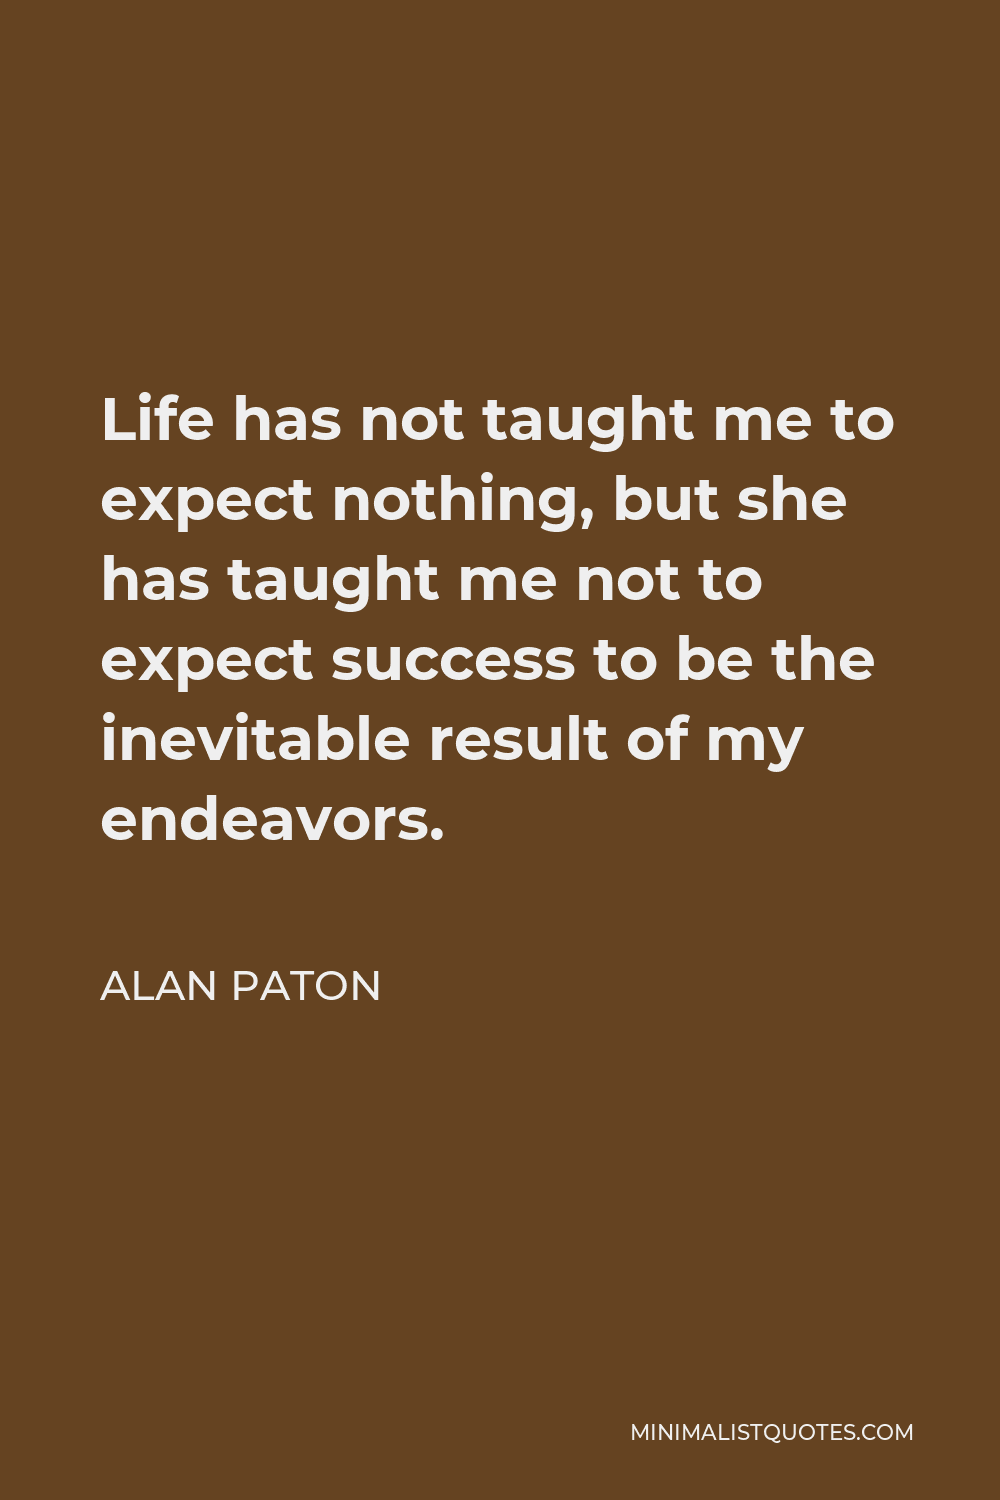 Alan Paton Quote - Life has not taught me to expect nothing, but she has taught me not to expect success to be the inevitable result of my endeavors.